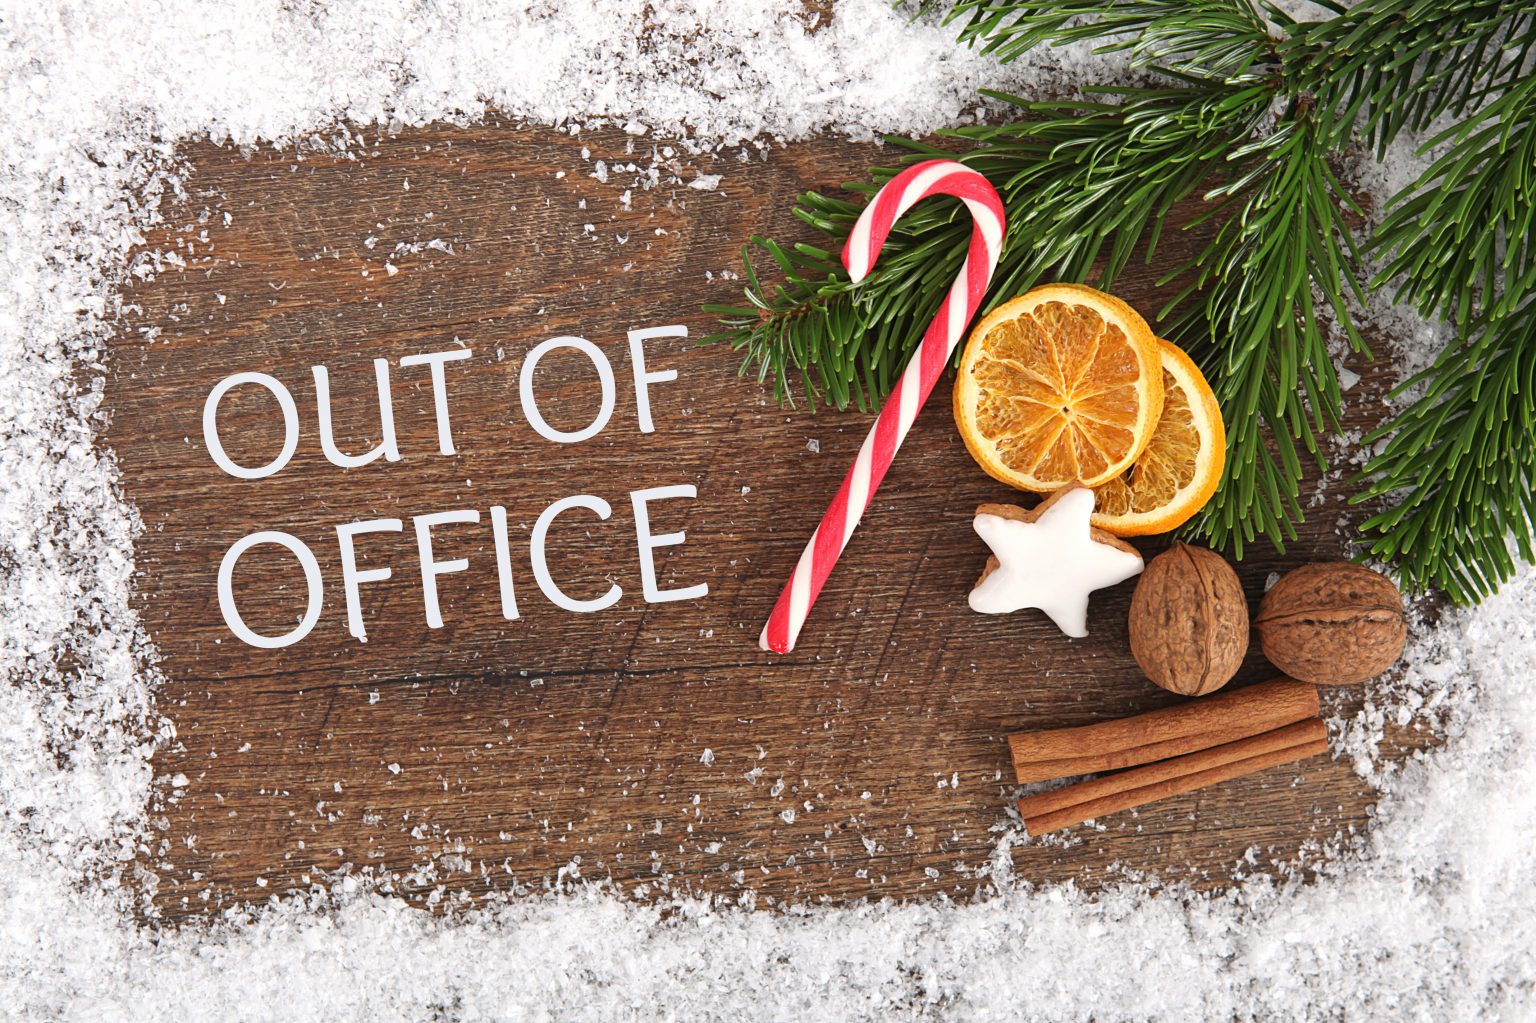 merry-christmas-out-of-office-needle-media-ltd